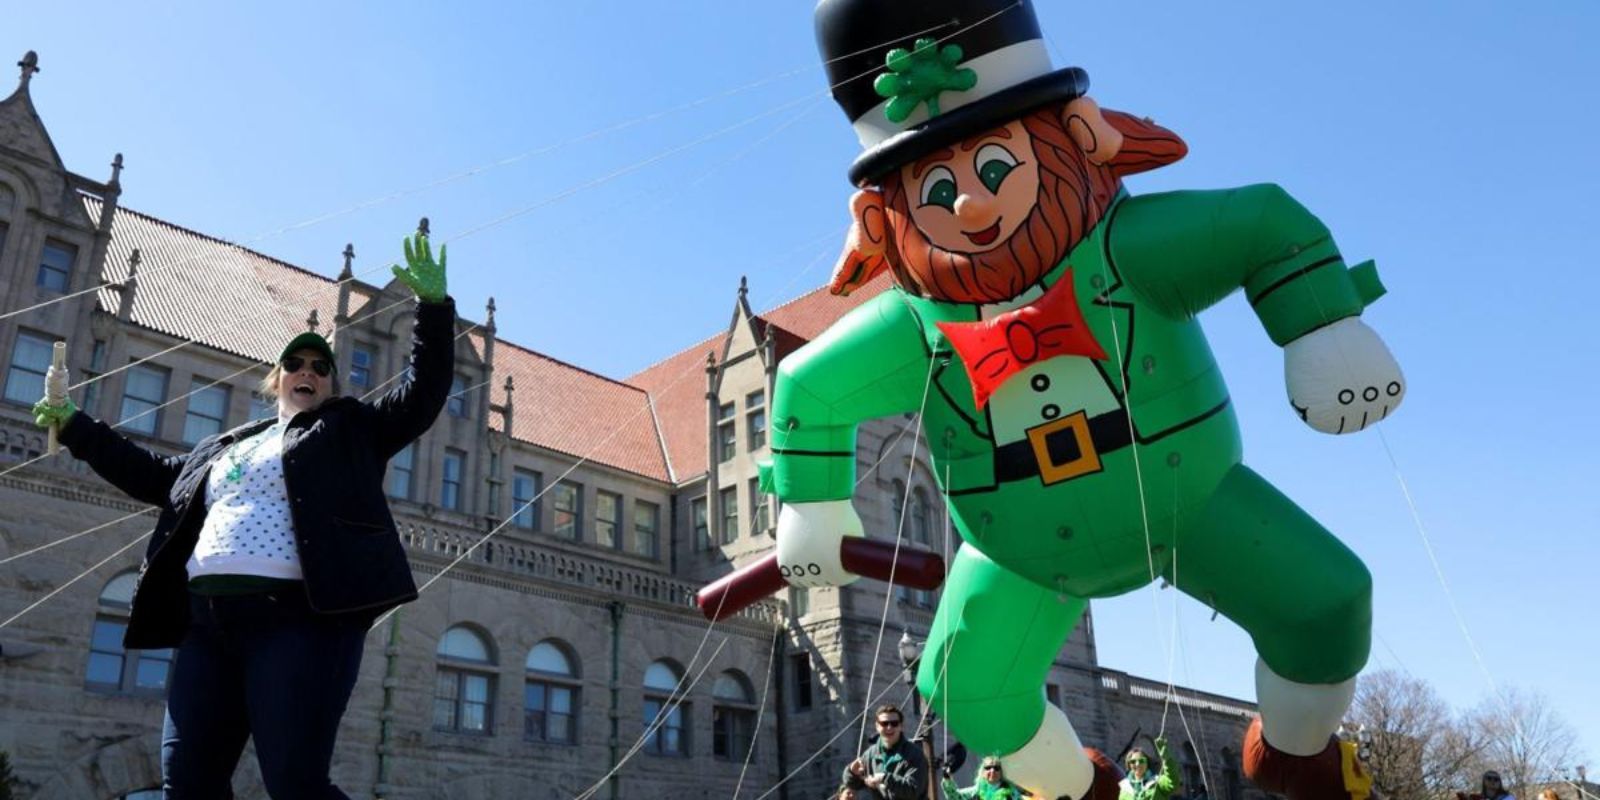 The annual St. Patrick’s Day Parade brings marching bands, vibrant floats, giant balloons and more to downtown St. Louis.